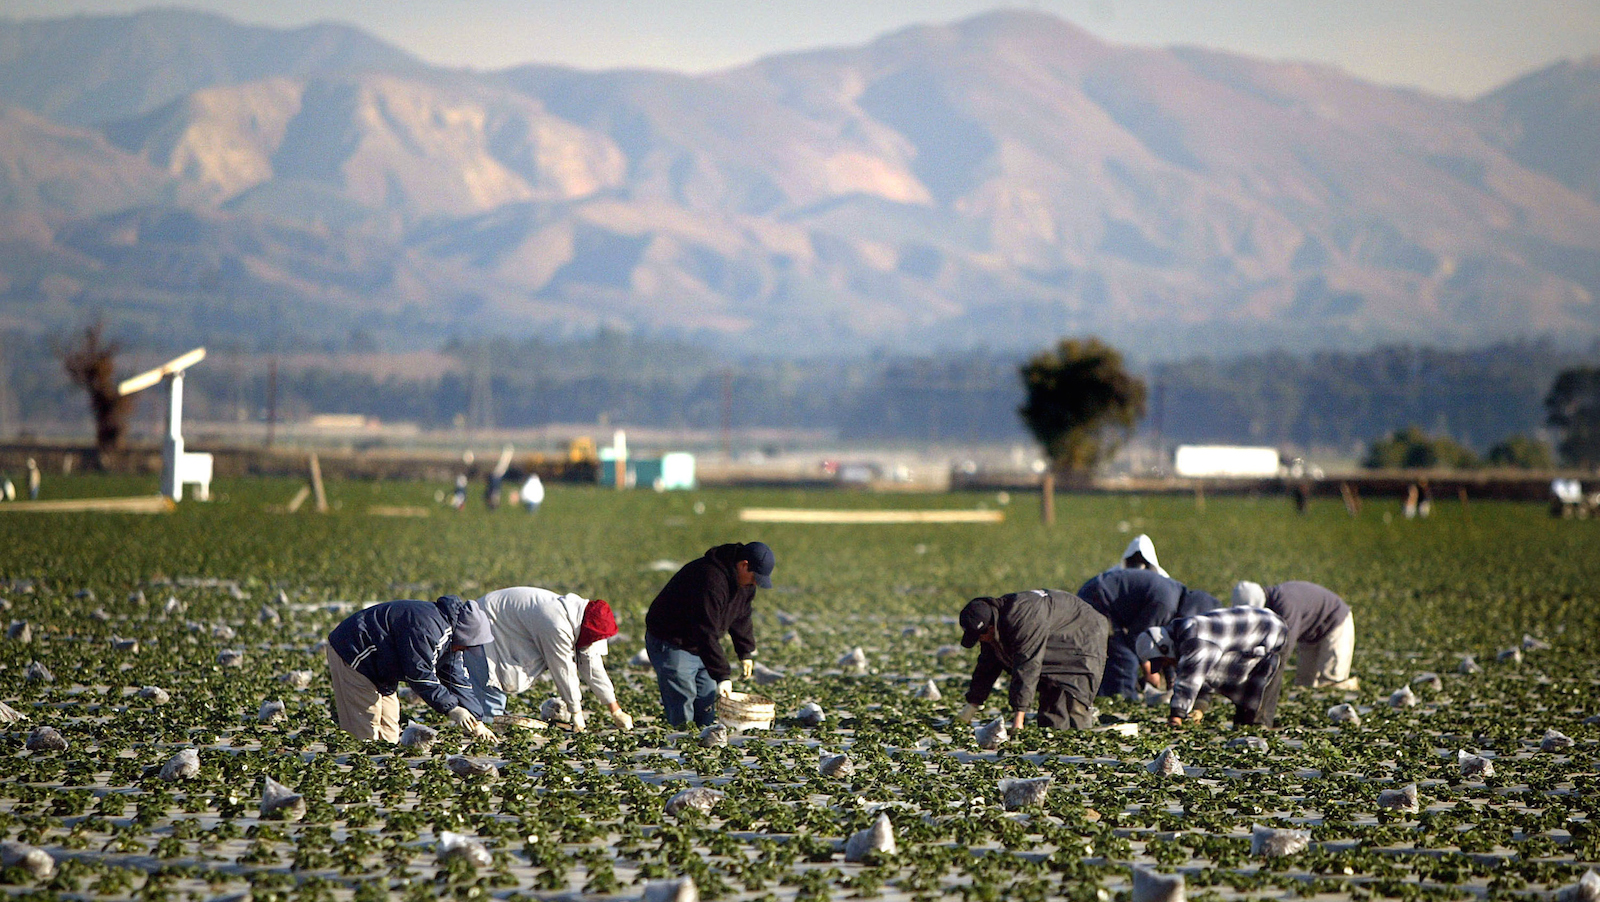 Farm workers collect strawberries in a California field.